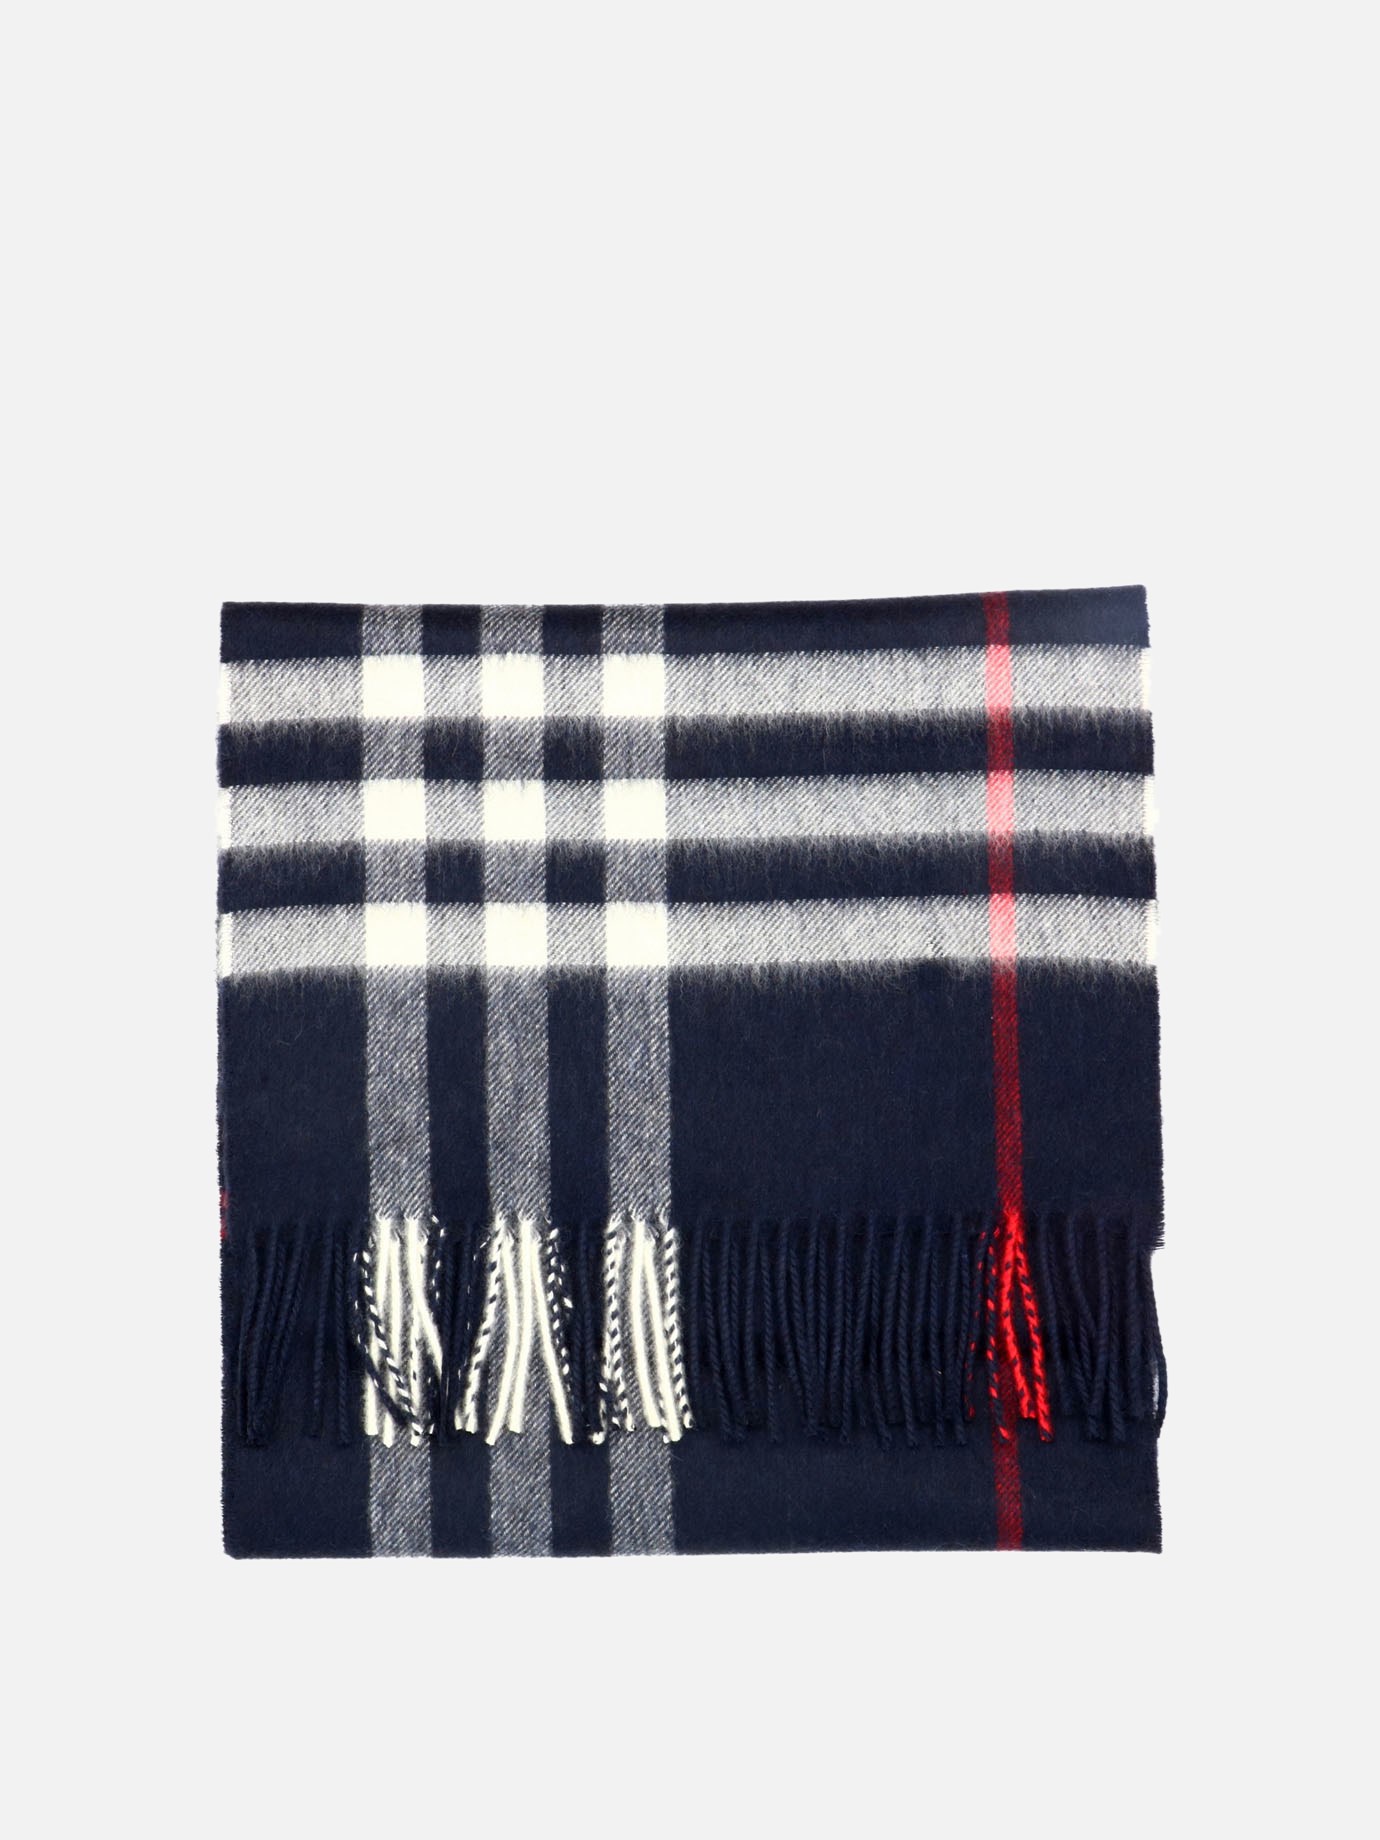  Giant Check  scarfby Burberry - 1